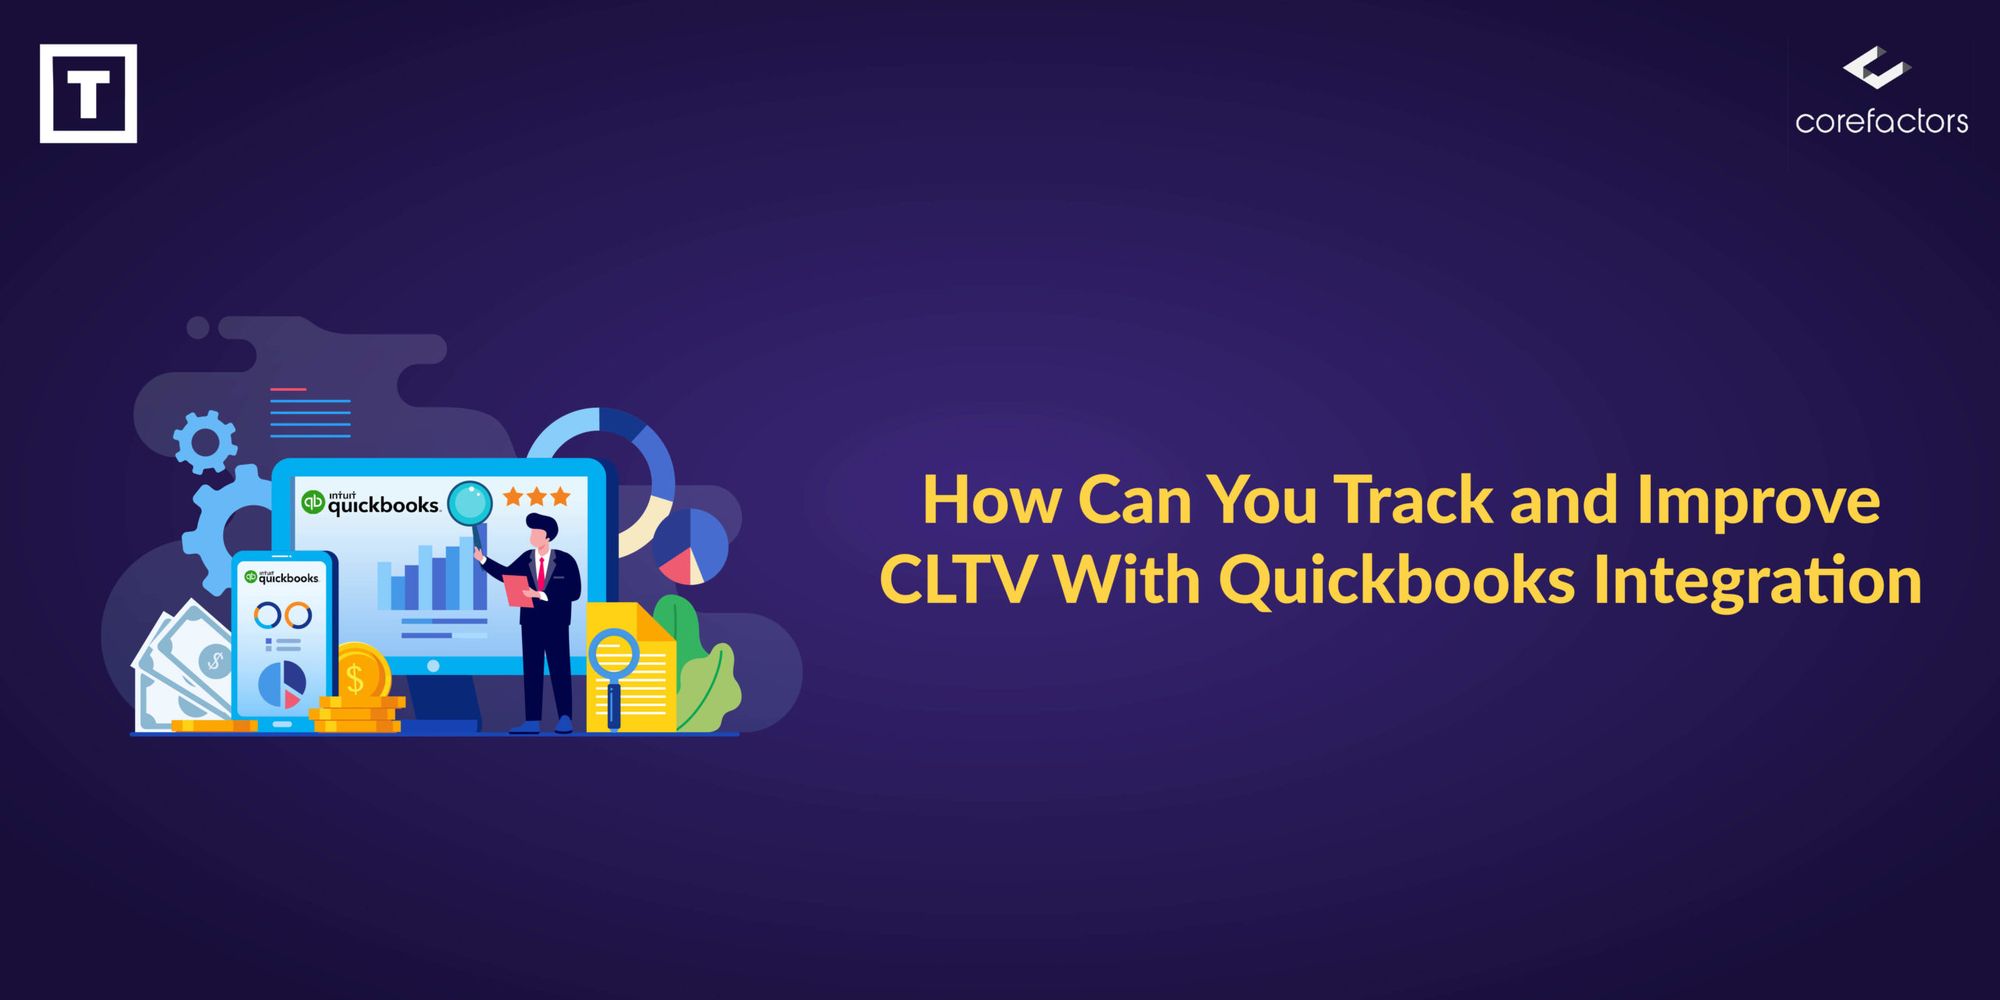 How Can You Track and Improve CLTV With Quickbooks Integration?